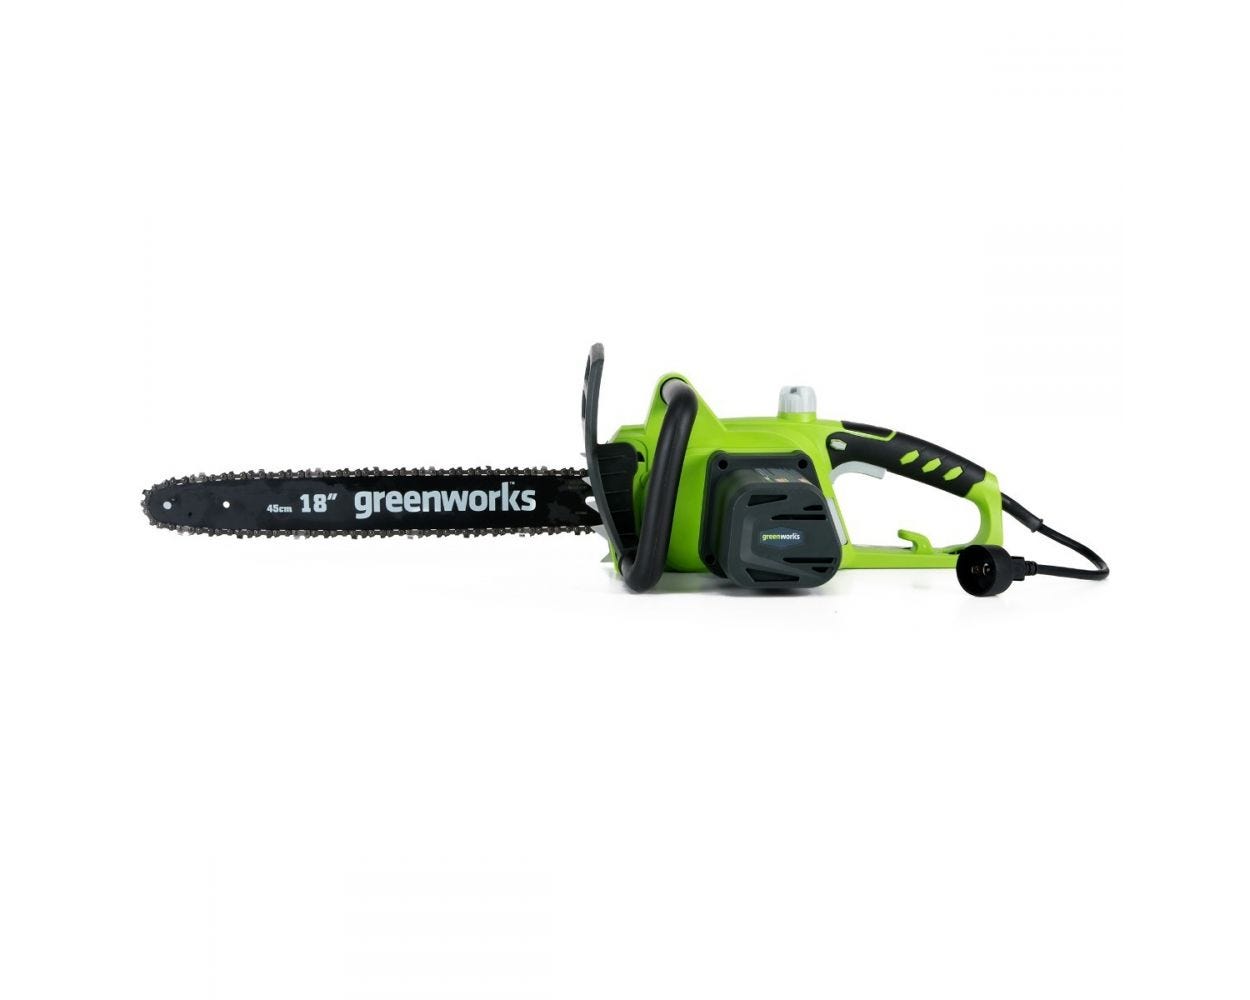 14.5 Amp 18" Corded Chainsaw